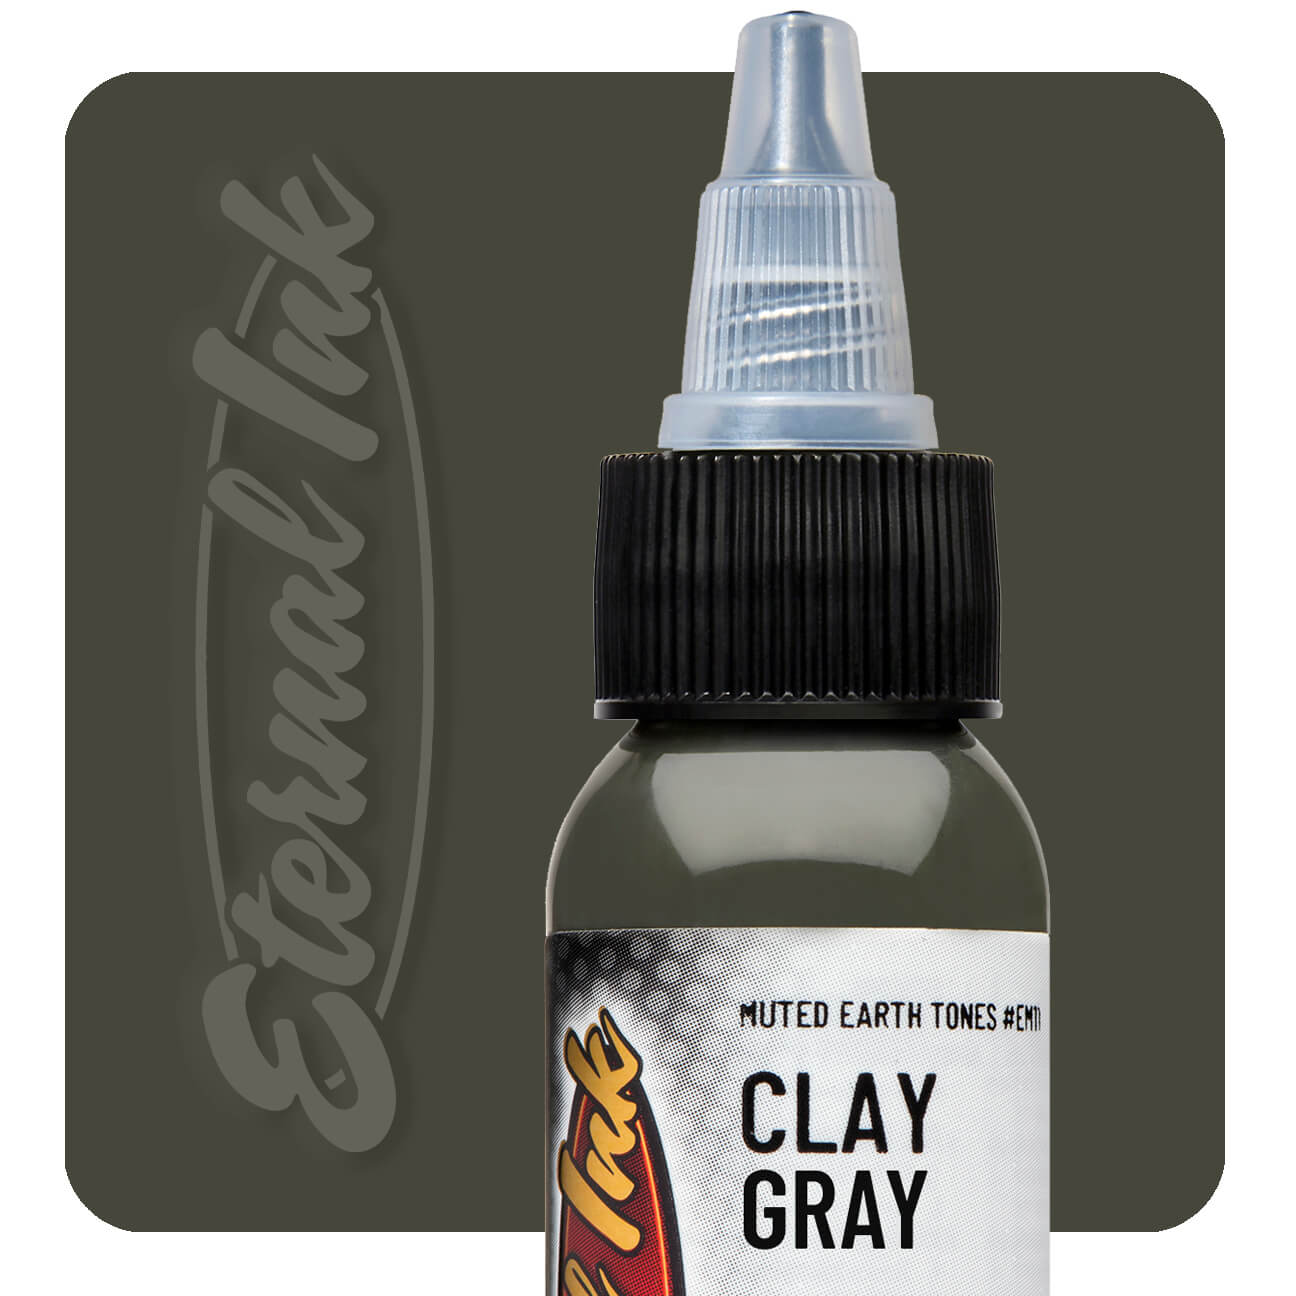 Eternal Muted Earth Tones - Clay Gray